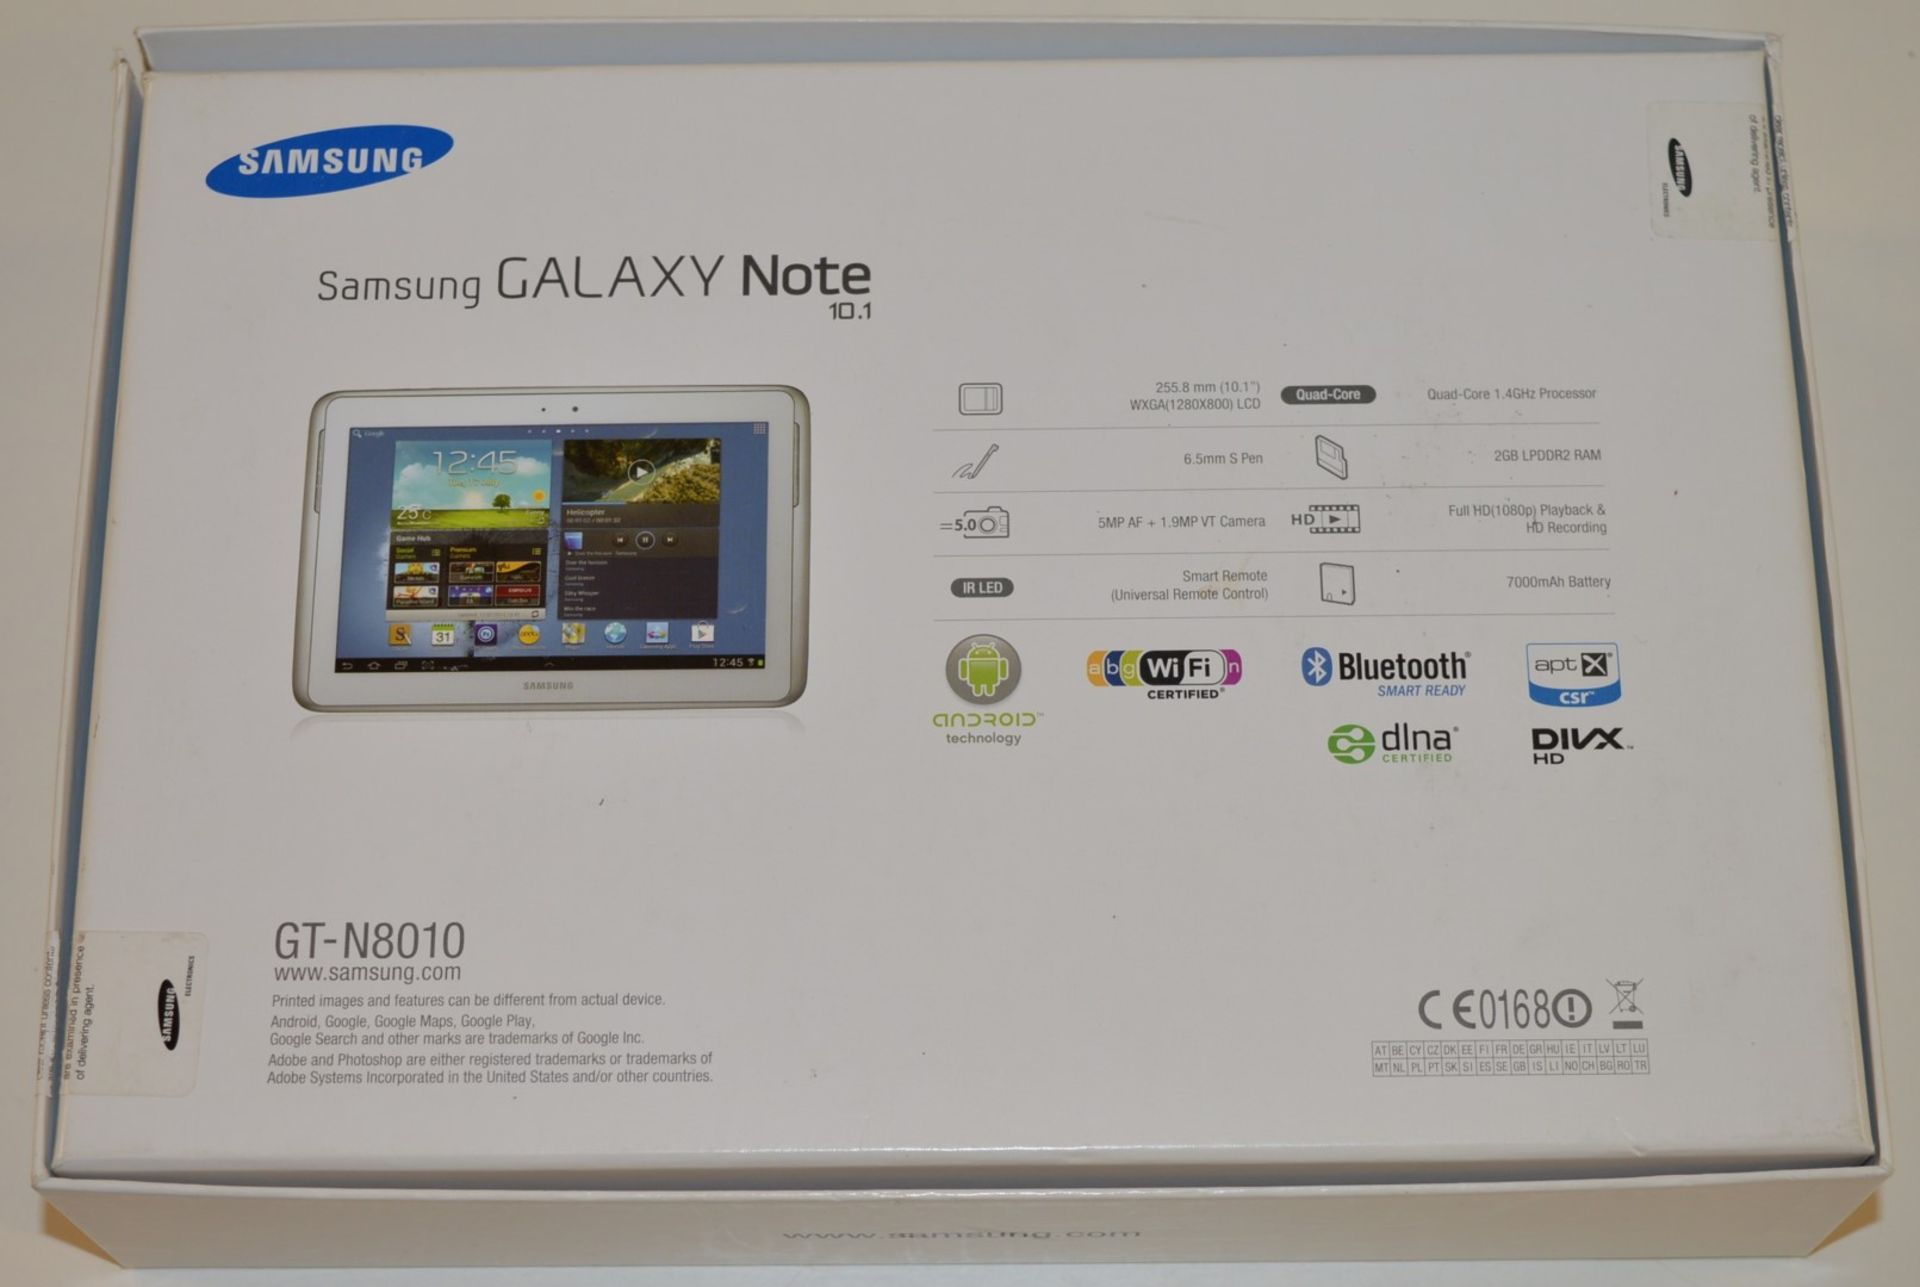 1 x Samsung Galaxy Note 10.1 Tablet Computer - Features Quad Core 1.4ghz Processor, 2gb Ram, 16gb - Image 8 of 10